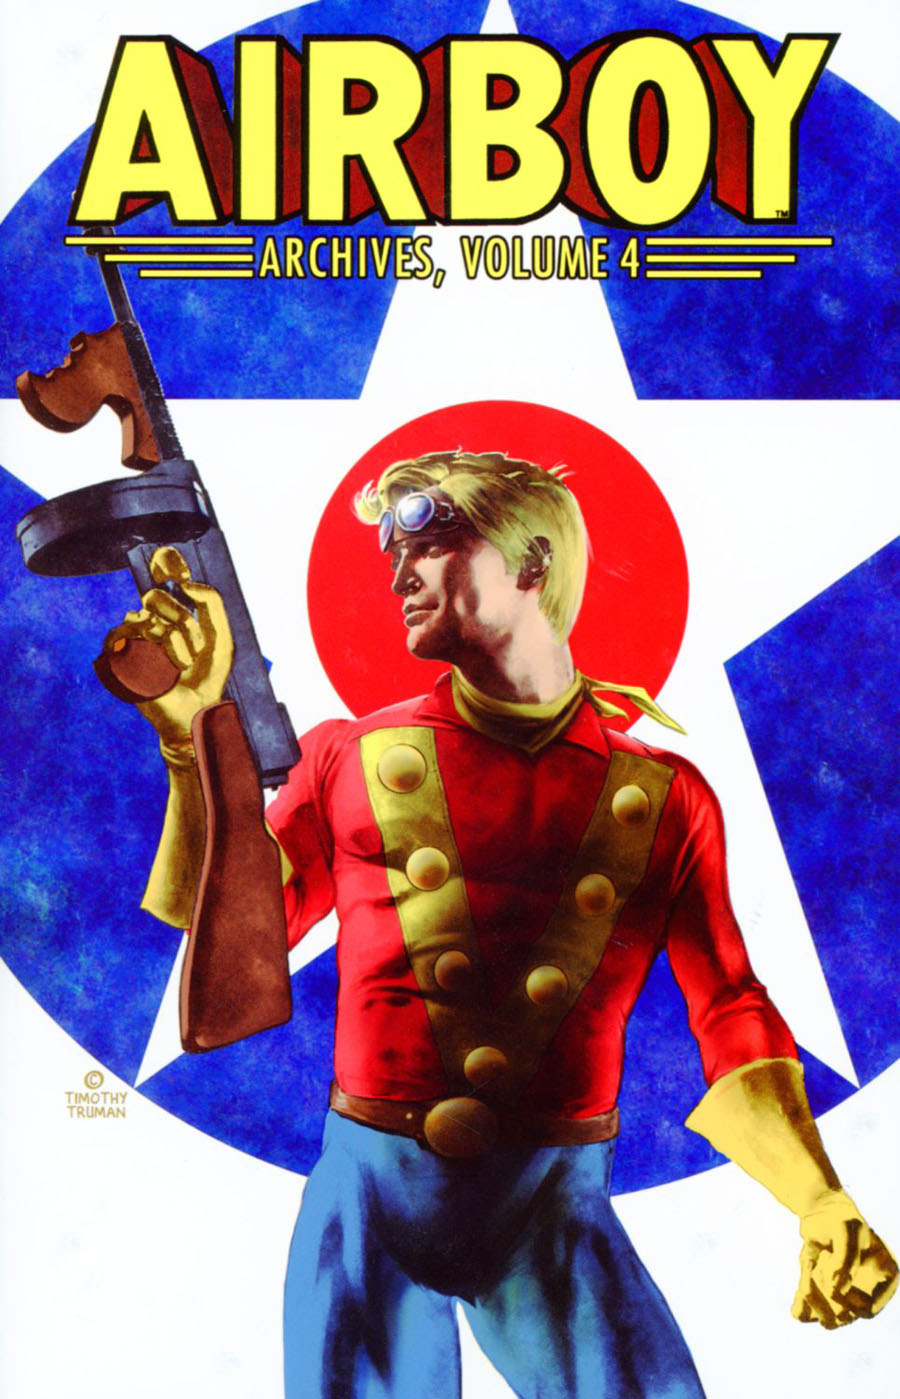 Airboy Archives Vol 4 TP